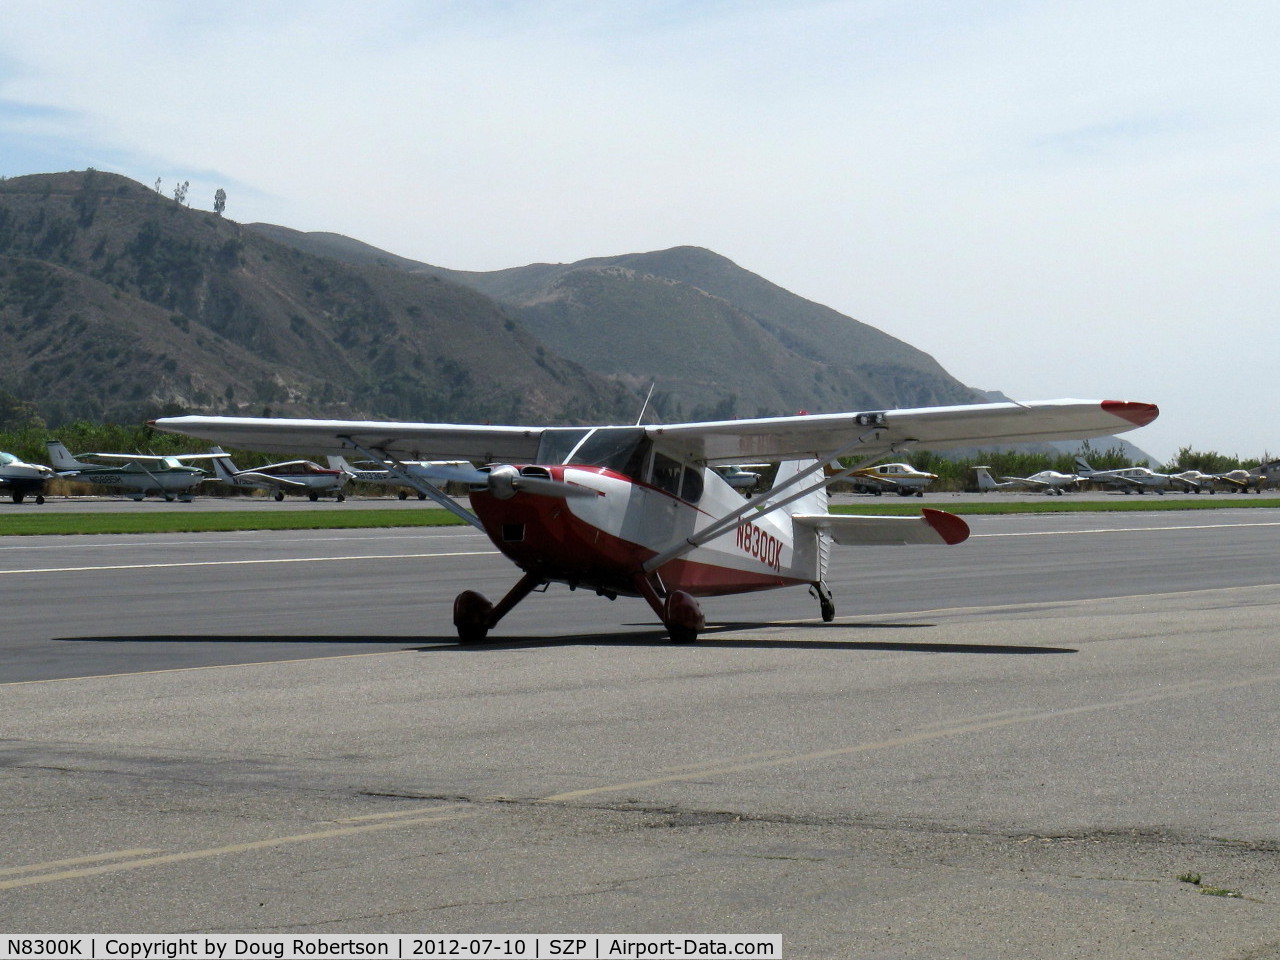 N8300K, Stinson 108-1 Voyager C/N 108-1300, Stinson 108-1 VOYAGER, Franklin 6A150-B3 150 Hp, taxi to 22 after landing